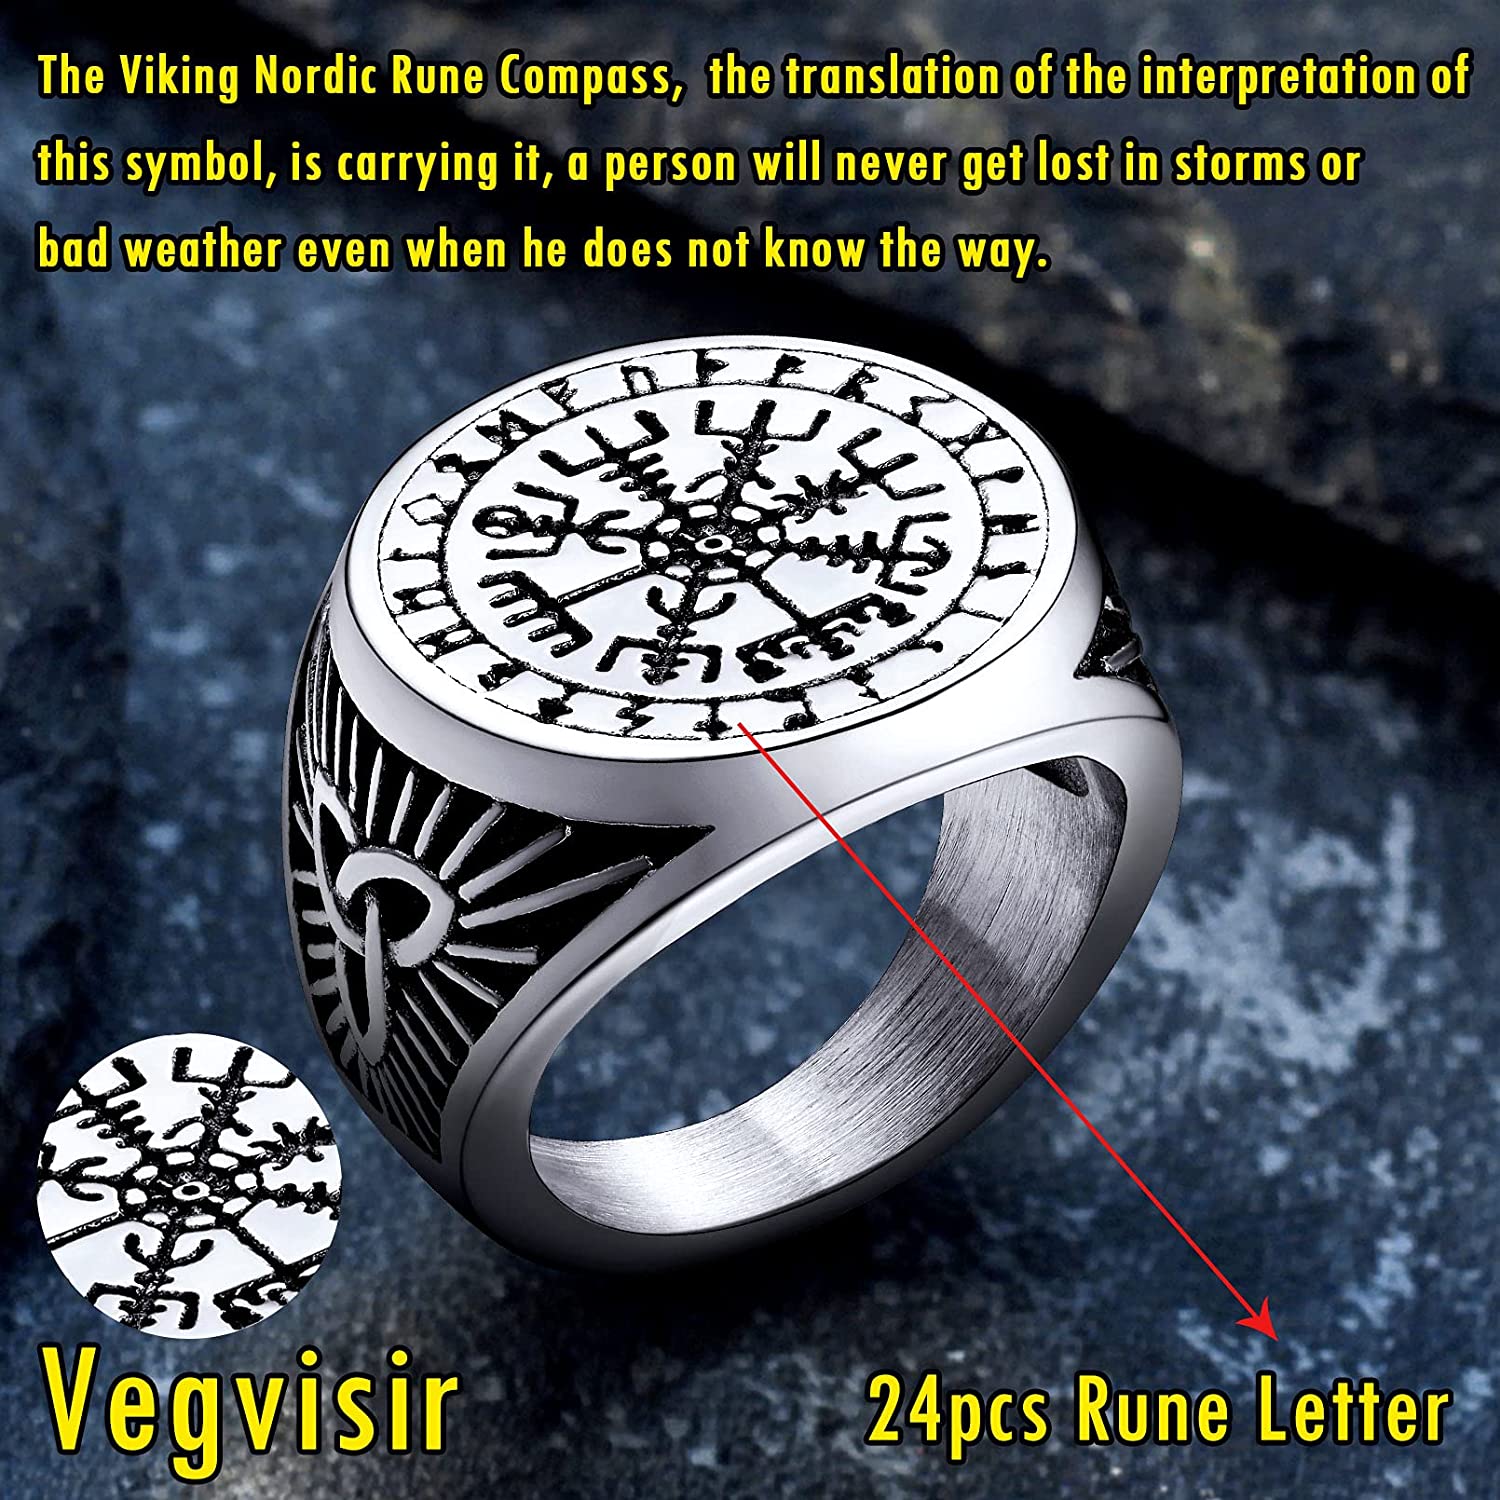 Norse Ring Men Signet s Viking Jewellery Runic Compass Vegvisir Thumb Stainless Steel Nordic s Gift for Halloween